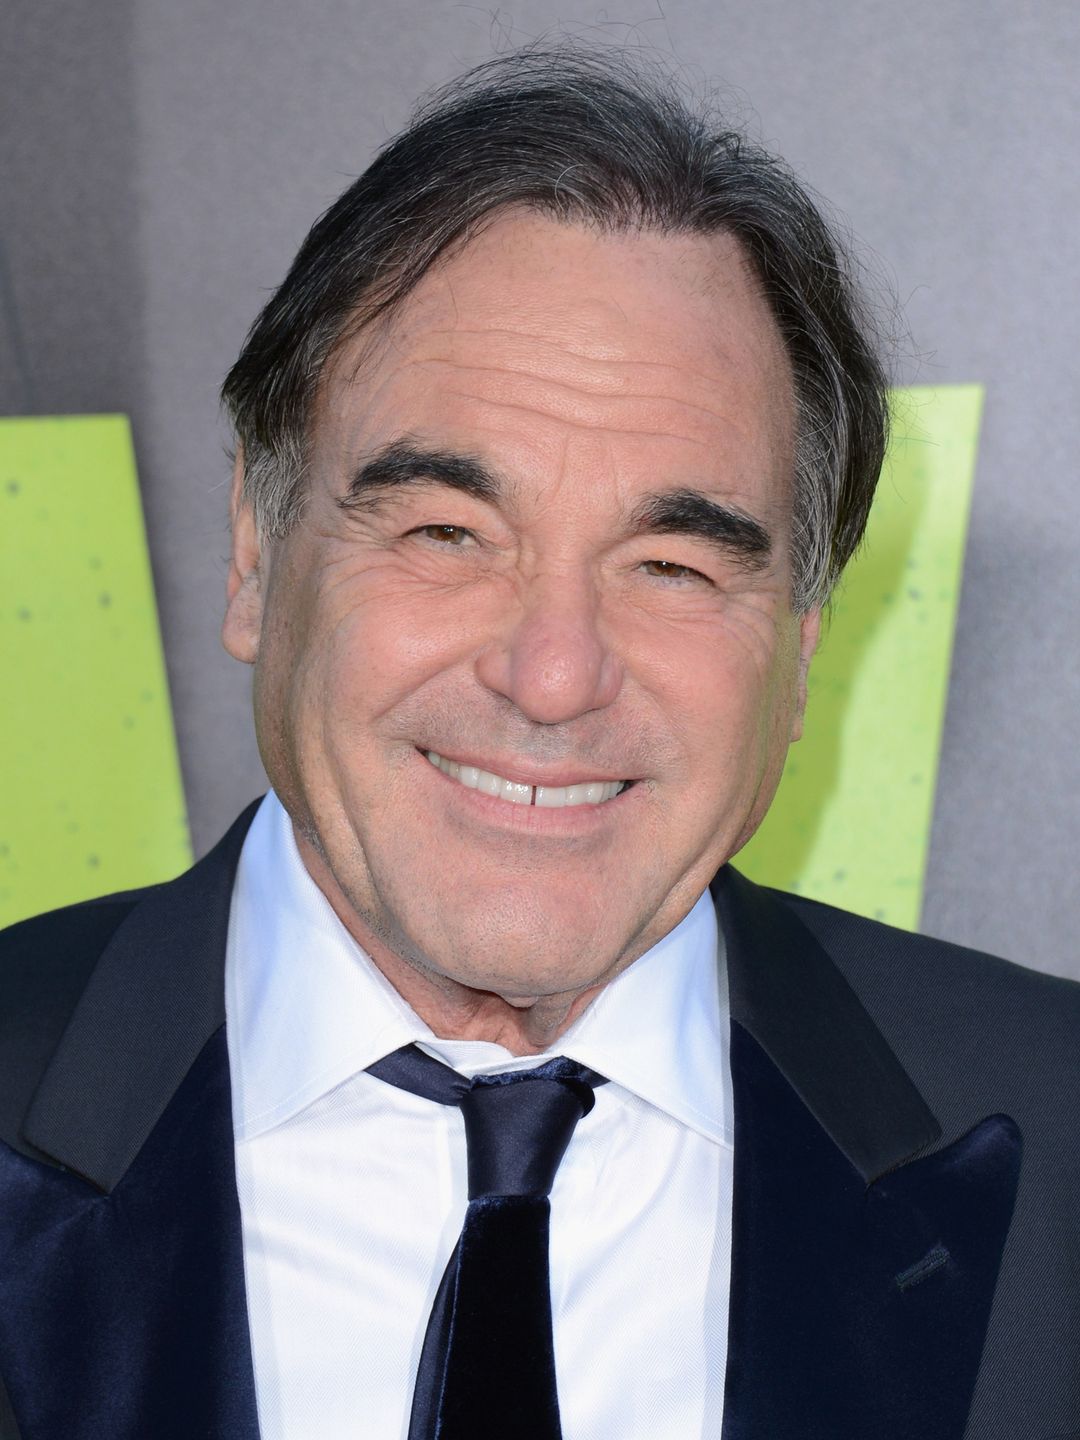 Oliver Stone early childhood